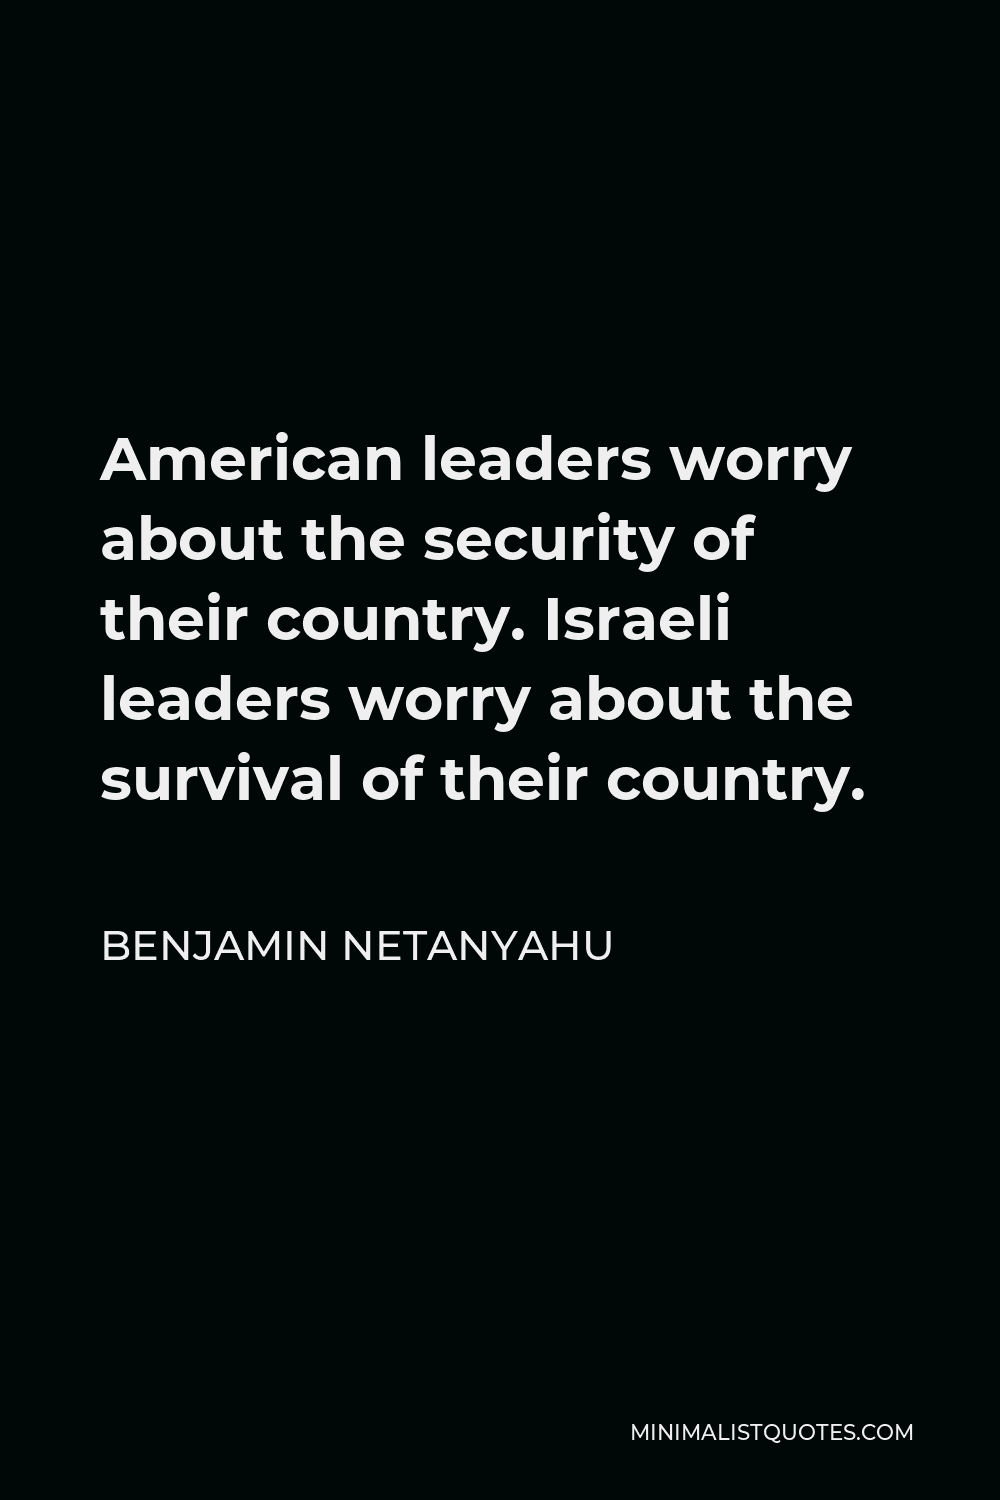 Benjamin Netanyahu Quote - American leaders worry about the security of their country. Israeli leaders worry about the survival of their country.